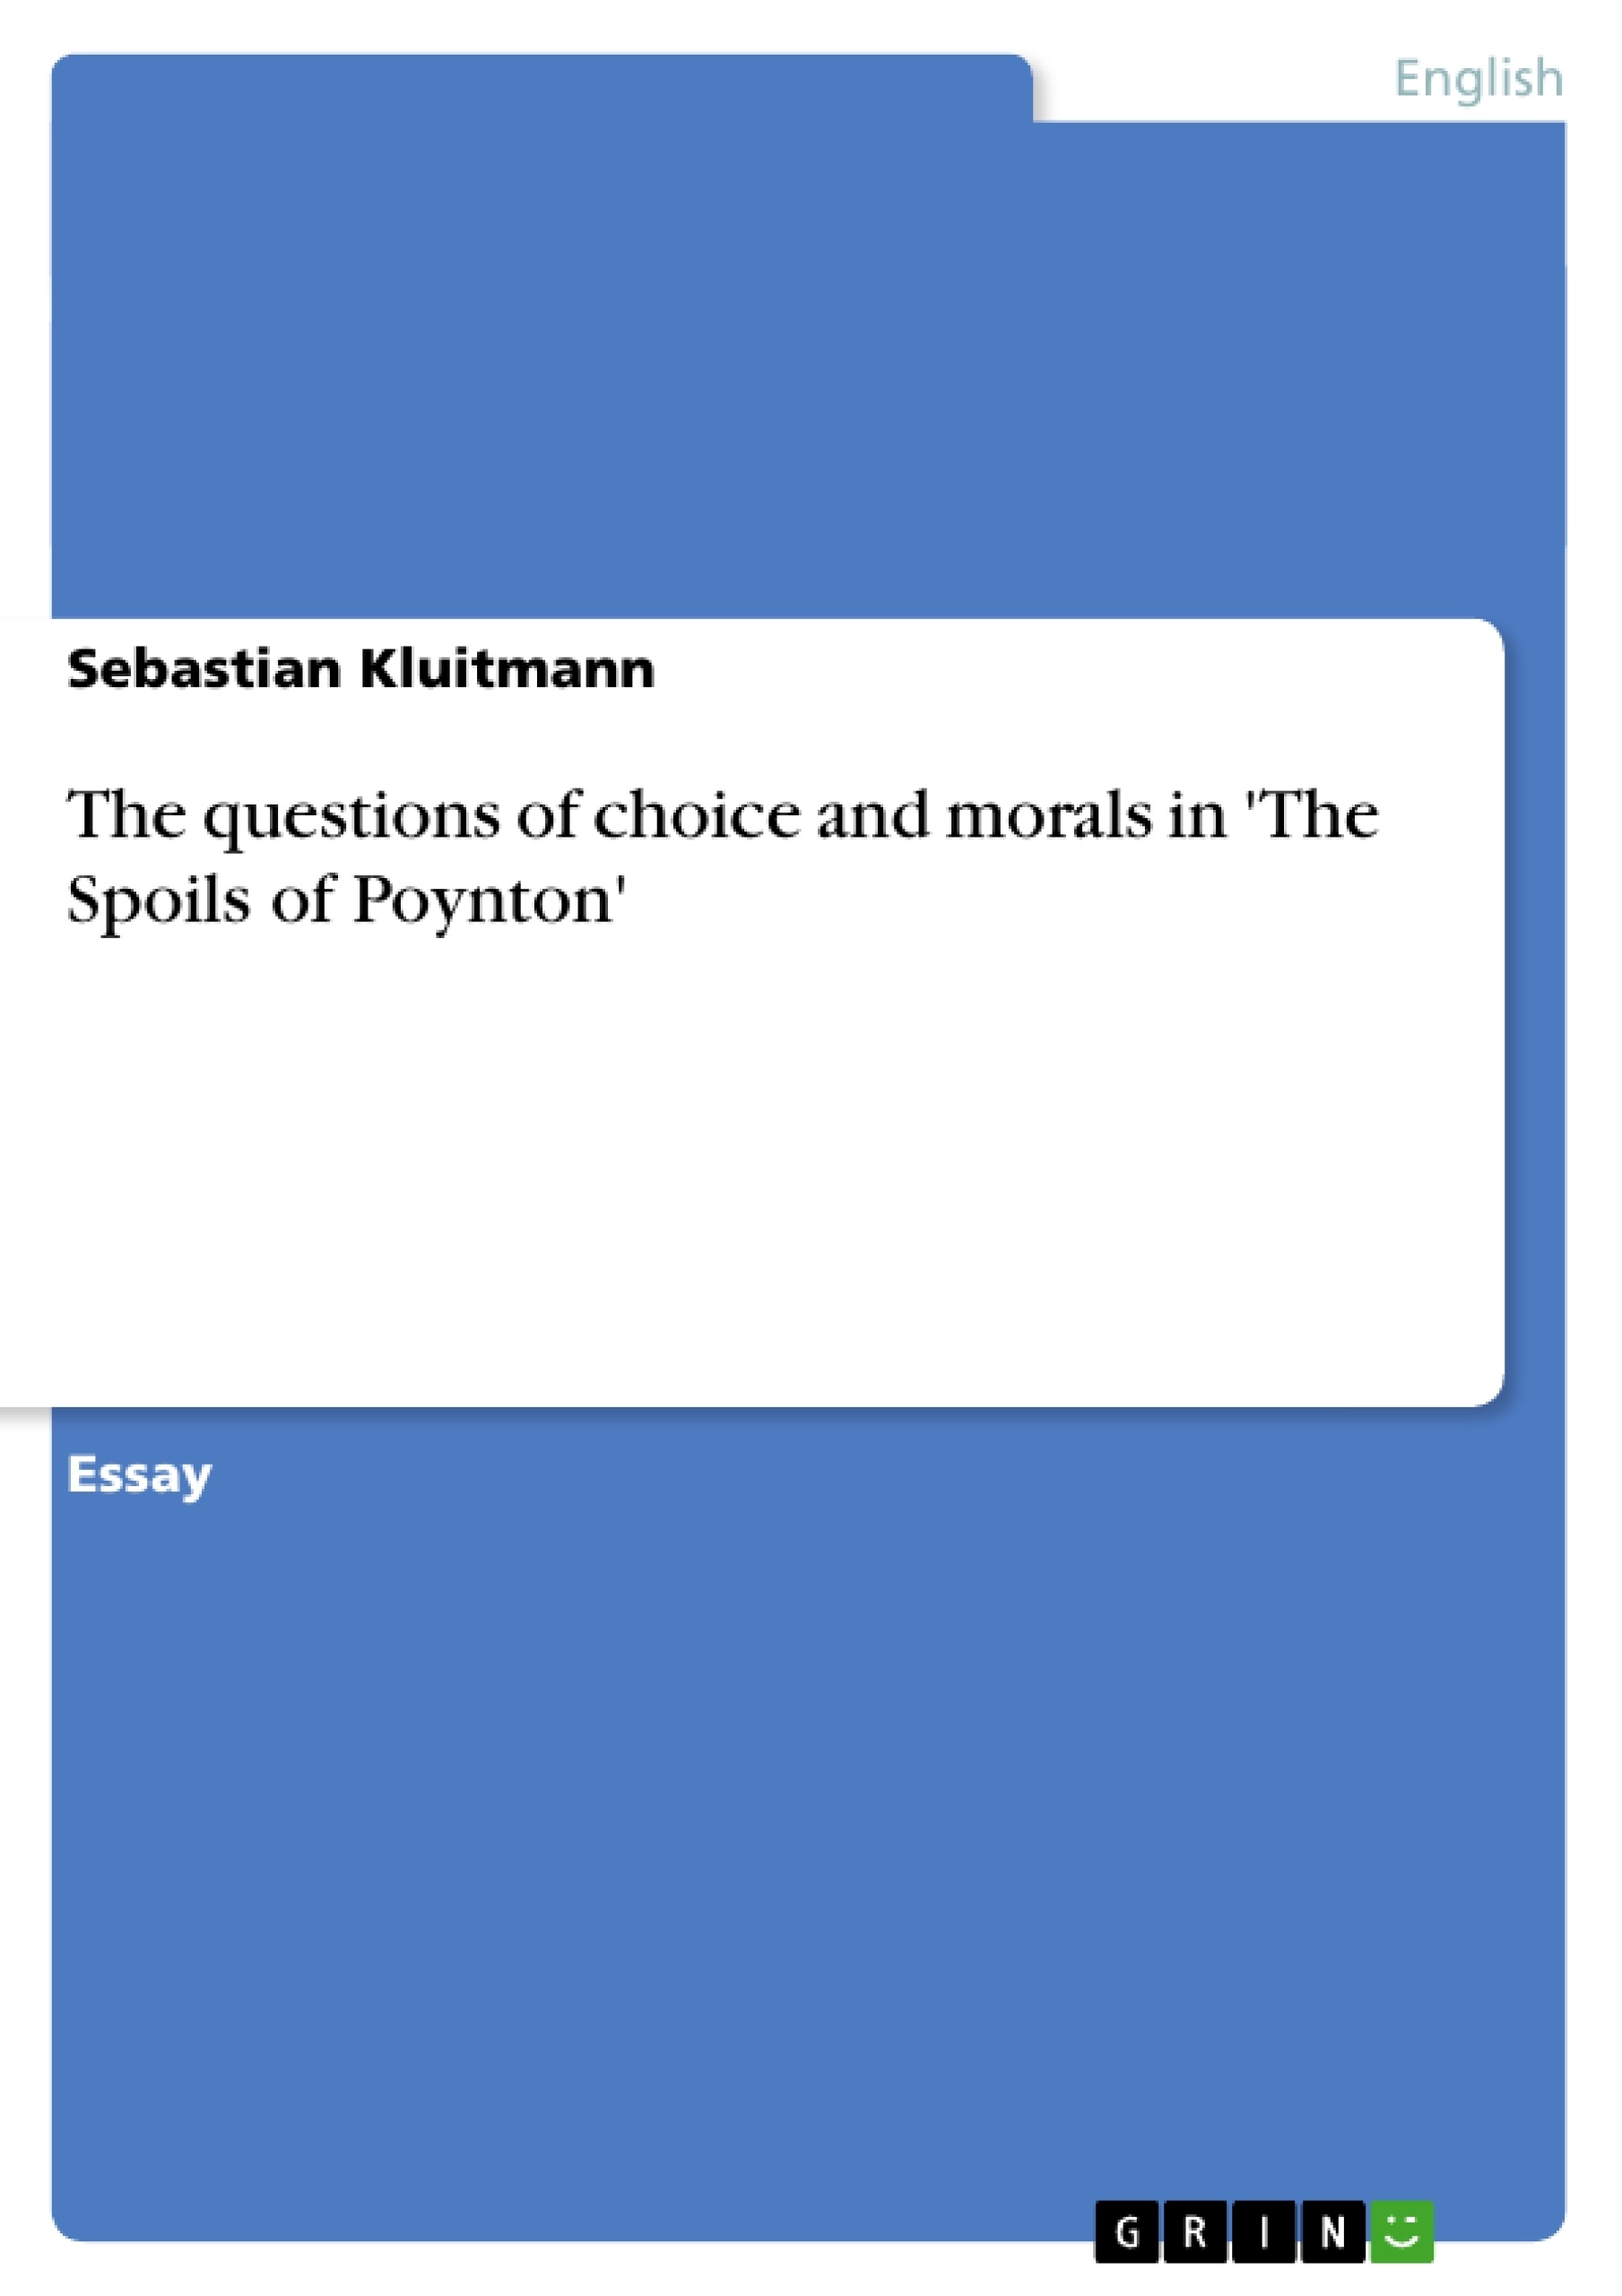 Title: The questions of choice and morals in 'The Spoils of Poynton'